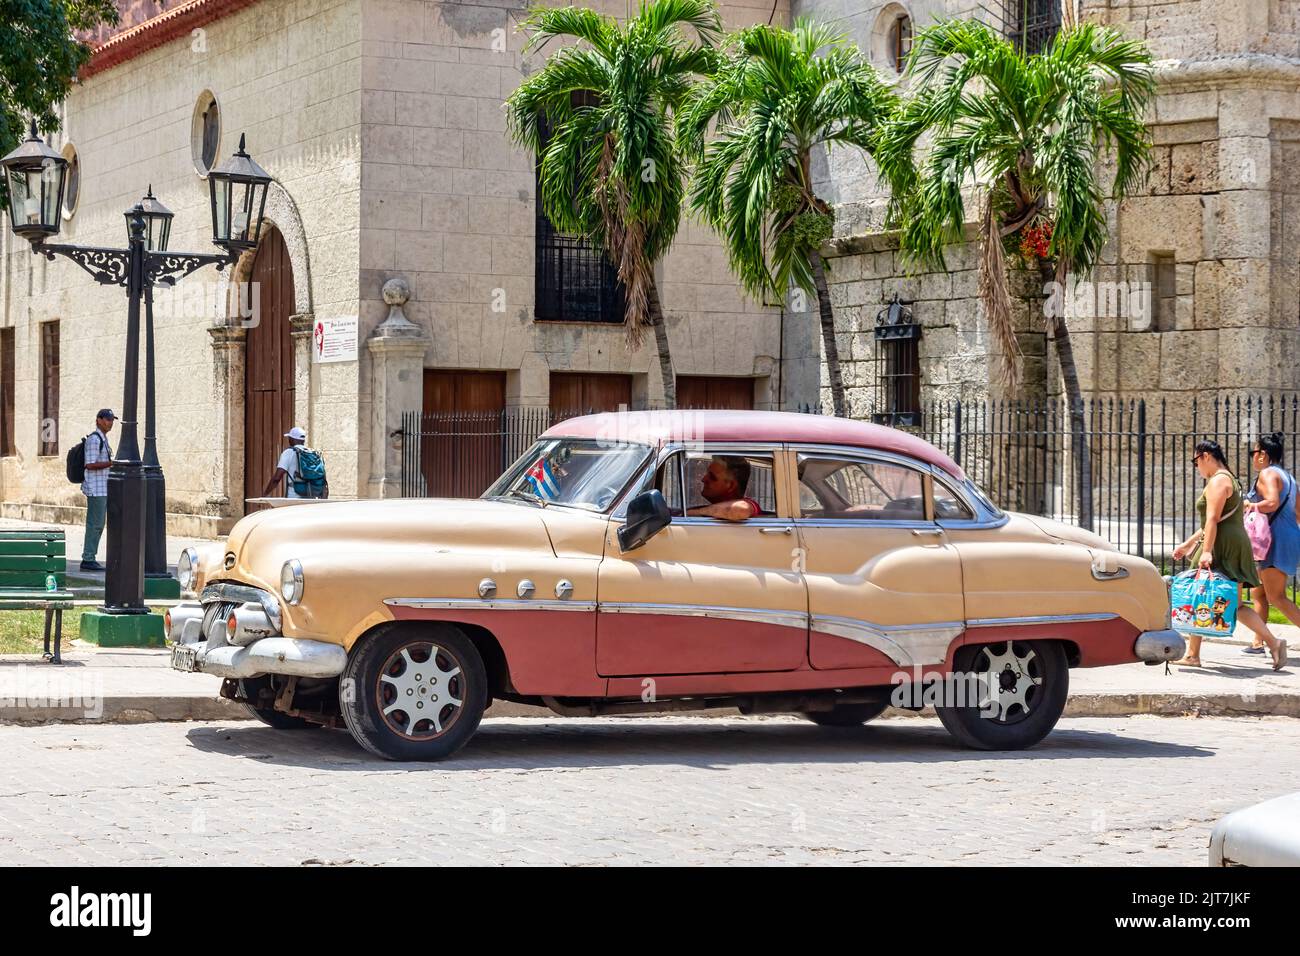 Old American car driving by a colonial style church. Cuban people are walking in the residential district Stock Photo